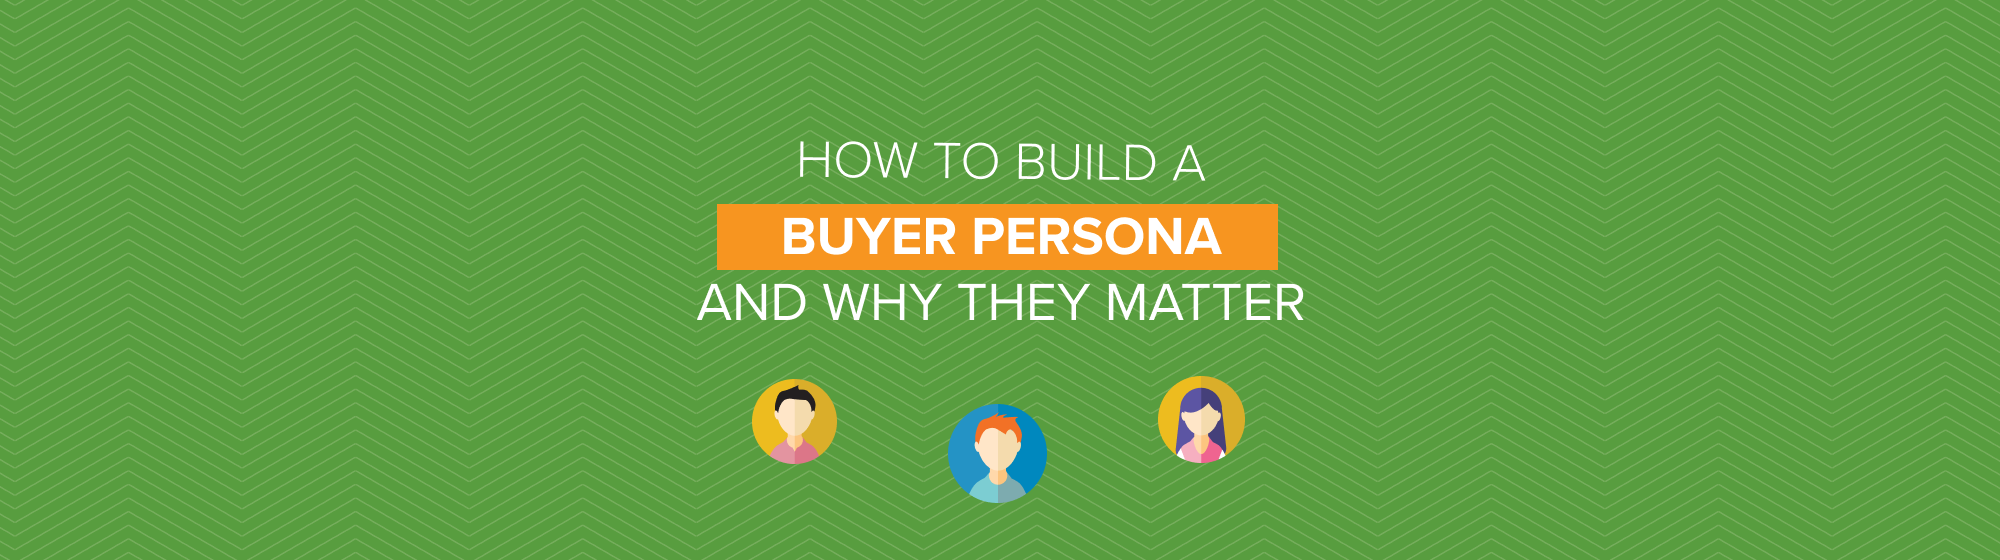 How to build a buyer persona and why they matter